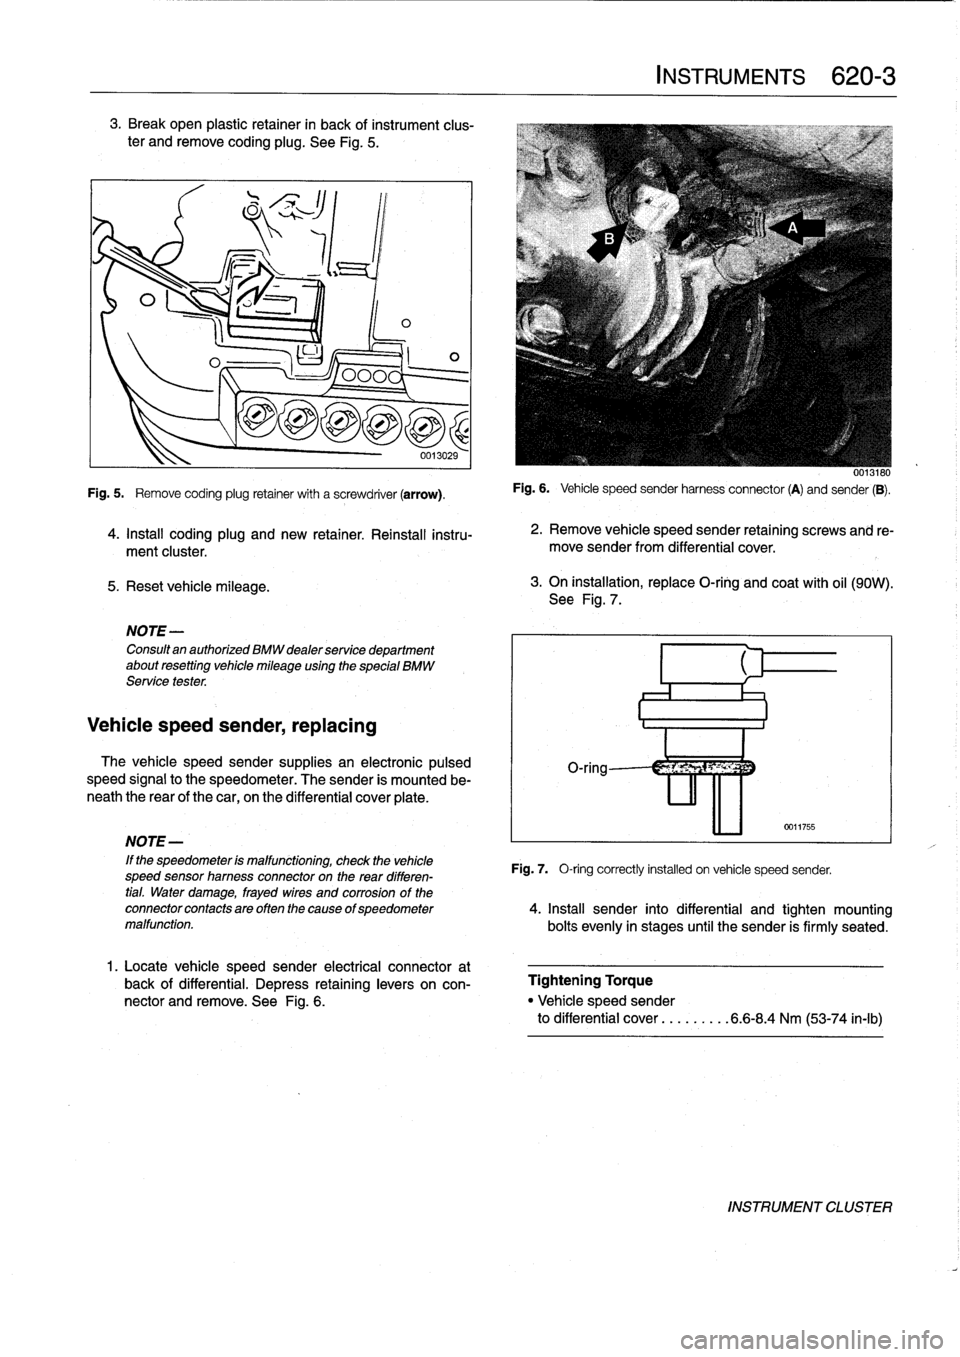 BMW M3 1993 E36 Workshop Manual 3
.
Break
open
plastic
retainer
in
back
of
instrument
clus-
ter
andremove
coding
plug
.
See
Fig
.
5
.

5
.
Reset
vehicle
mileage
.

1
ILO

NOTE-

Consultan
authorized
BMW
dealer
service
department
abo